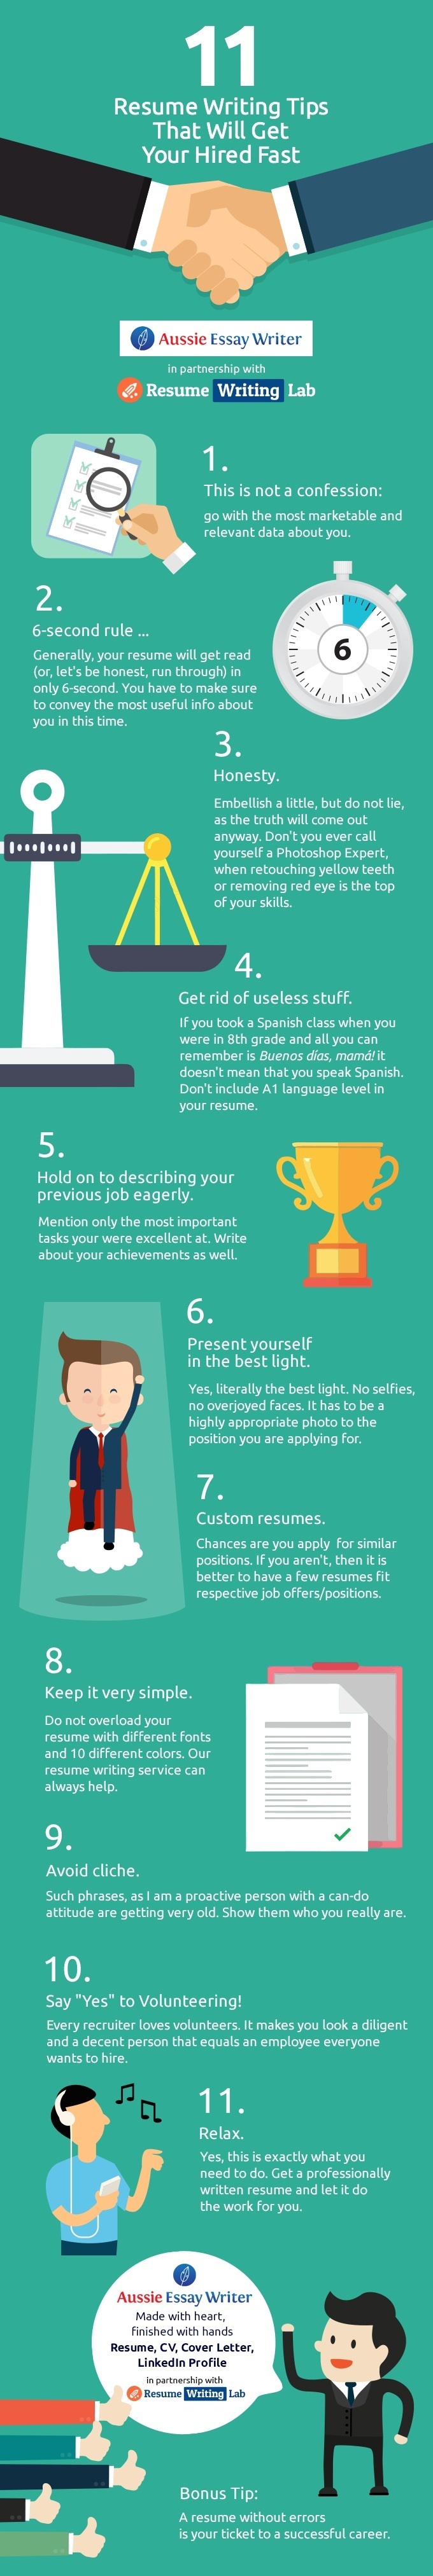 11 Resume Writing Tips That Will Get You Hired Fast Infographic